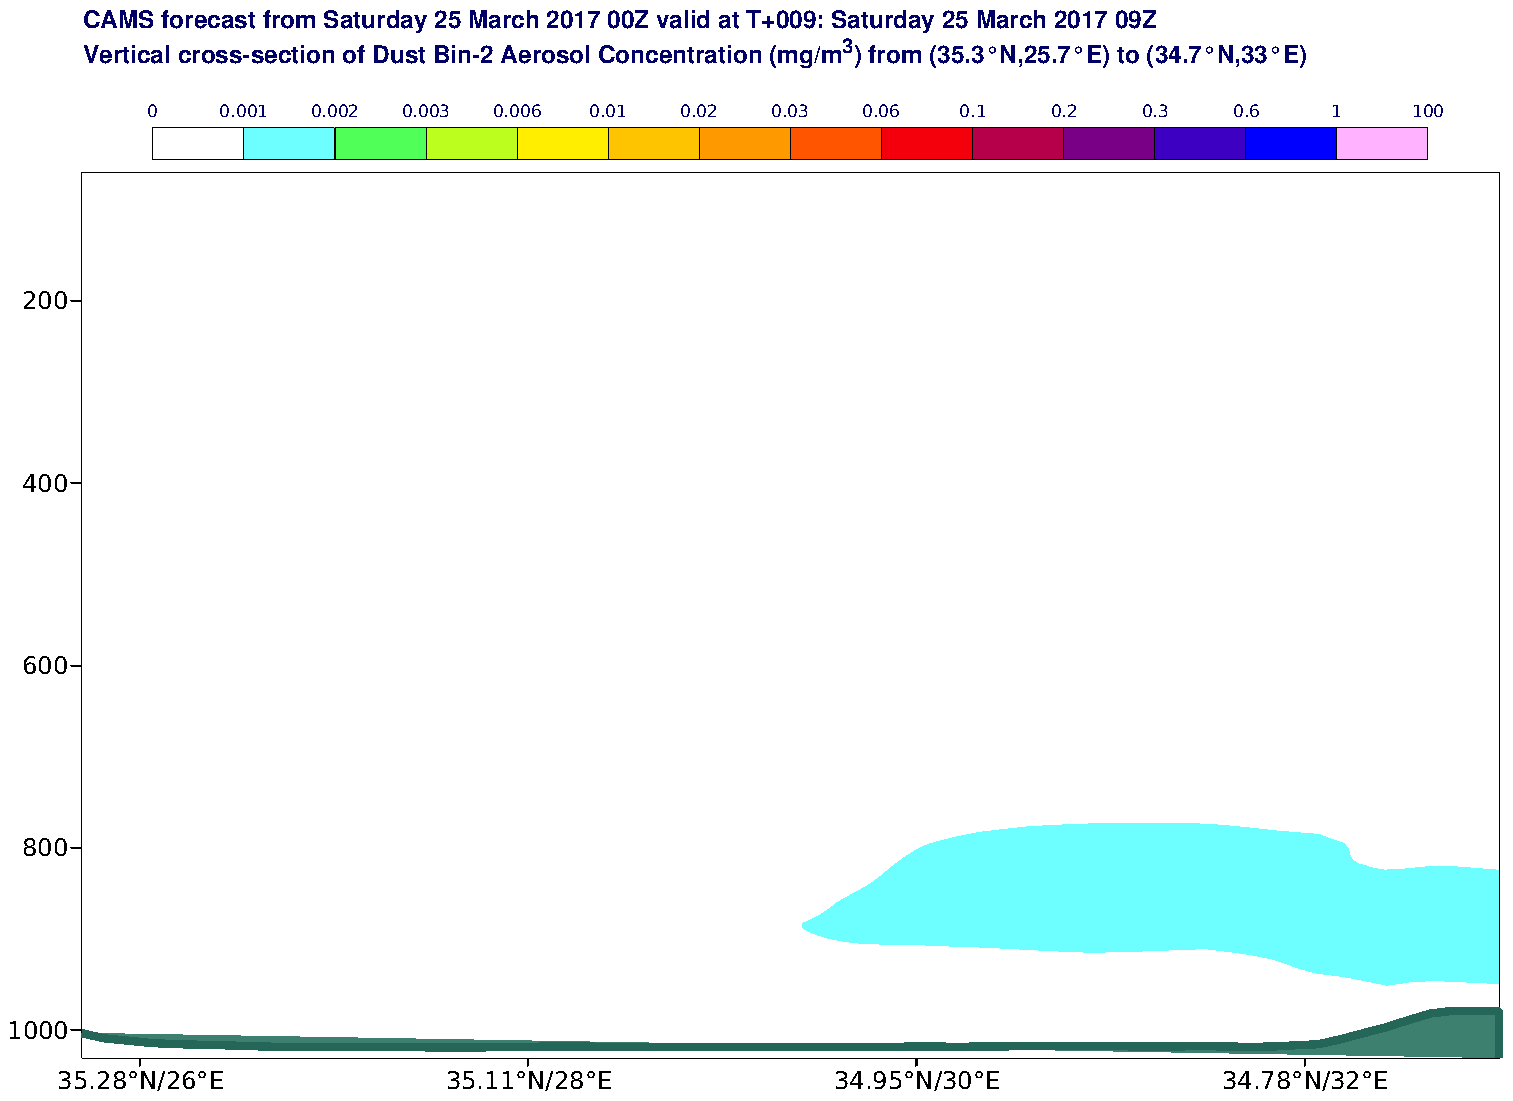 Vertical cross-section of Dust Bin-2 Aerosol Concentration (mg/m3) valid at T9 - 2017-03-25 09:00